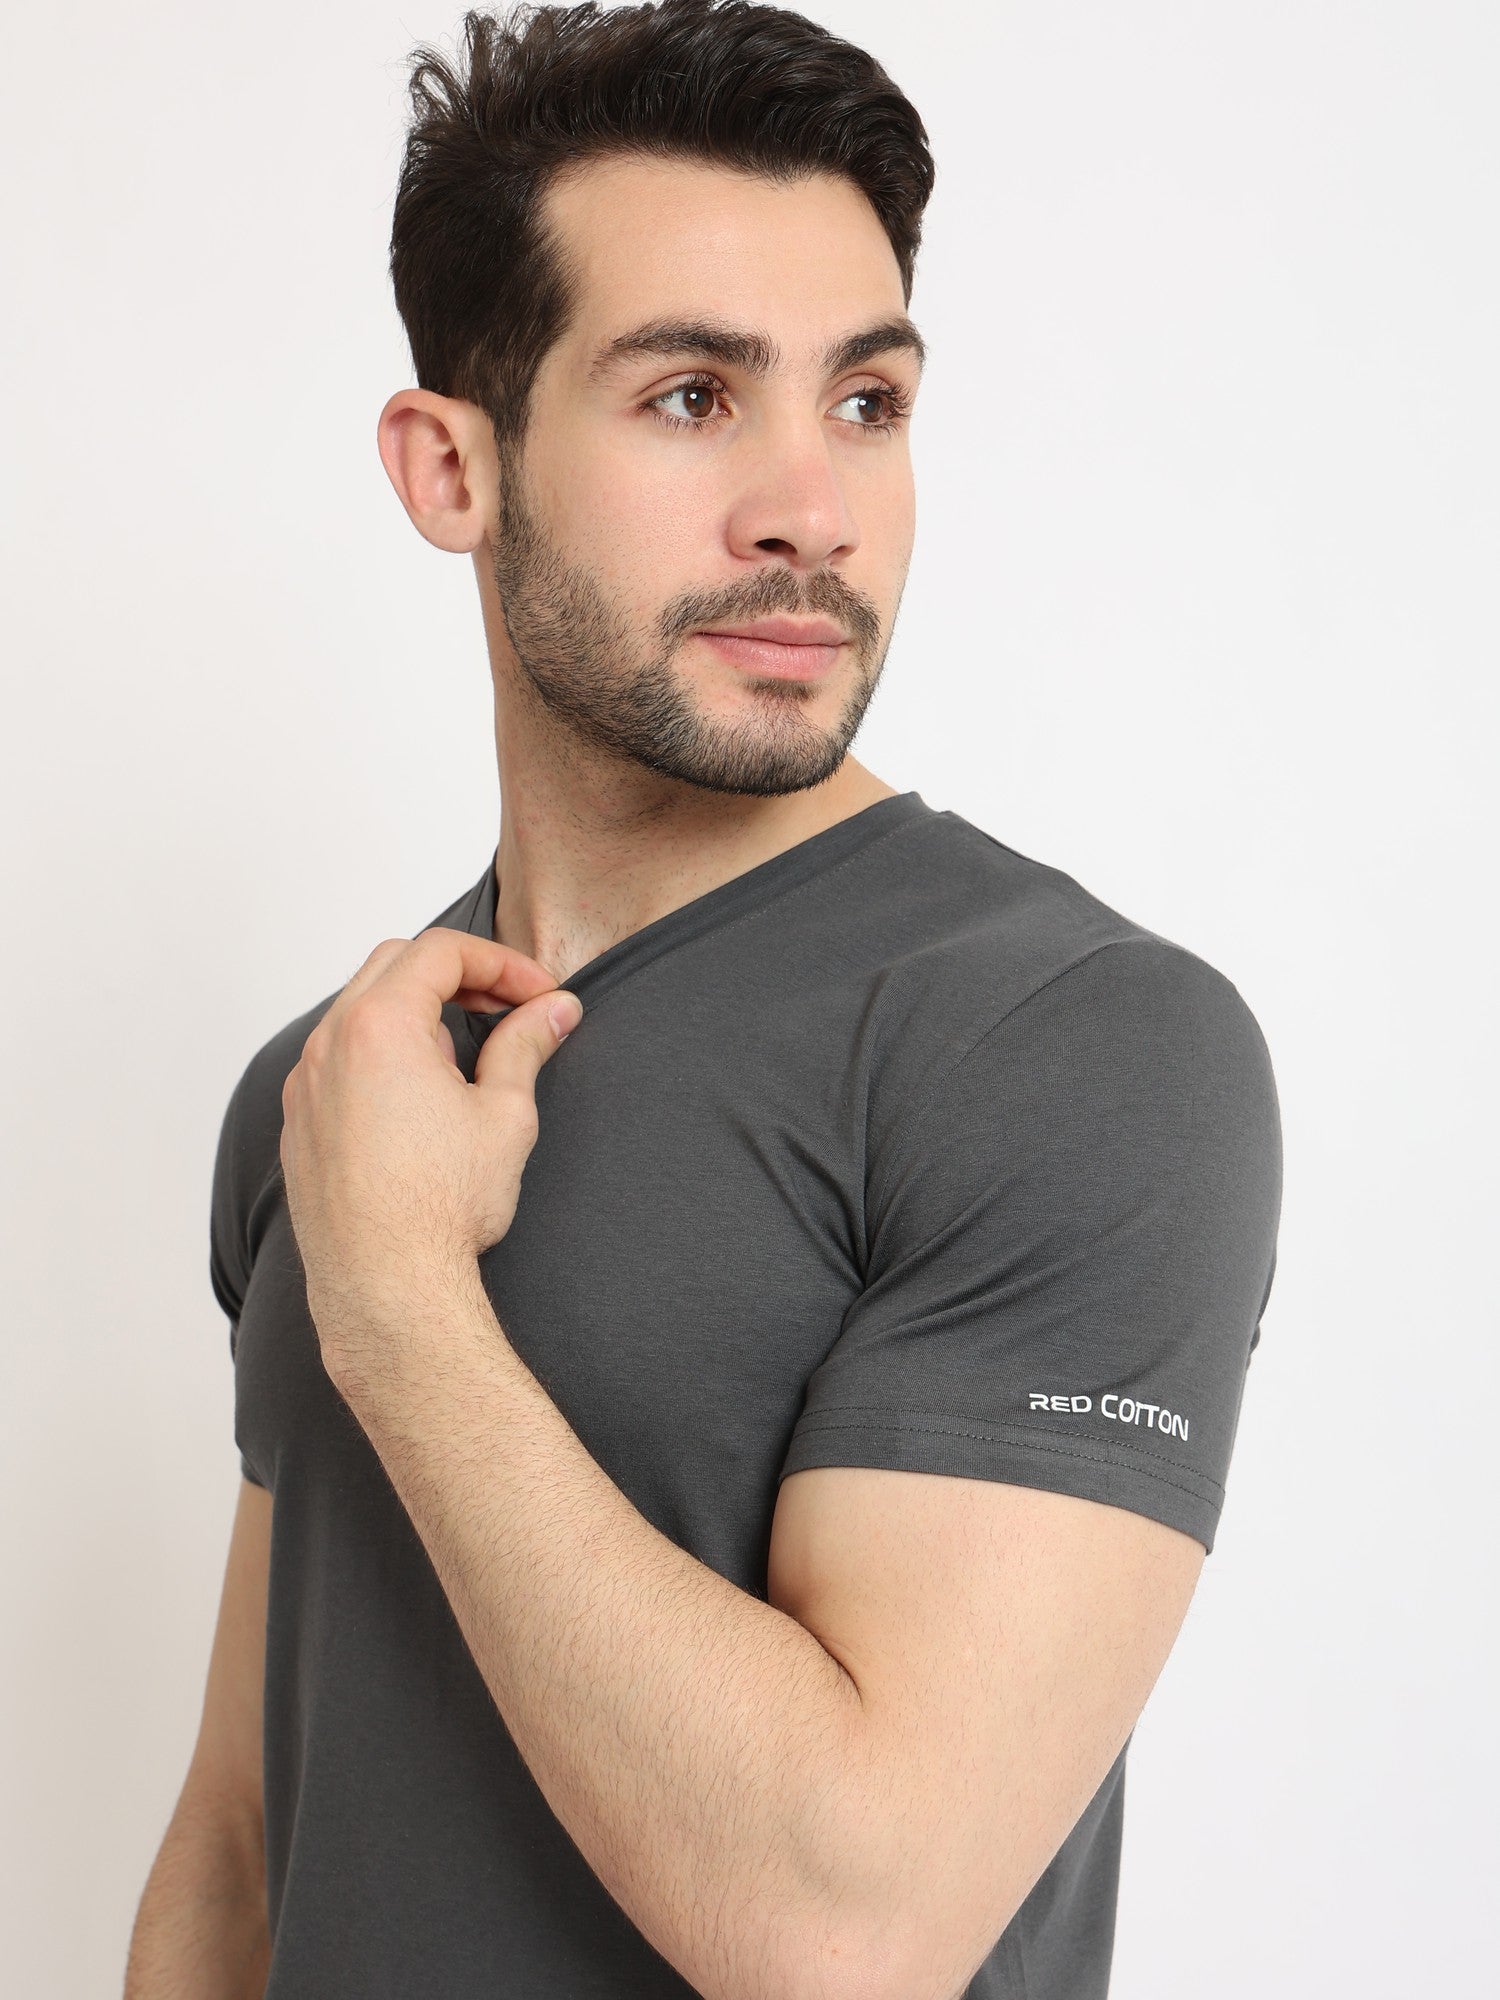 Undershirt for men, short sleeves, from Red Cotton-Grey